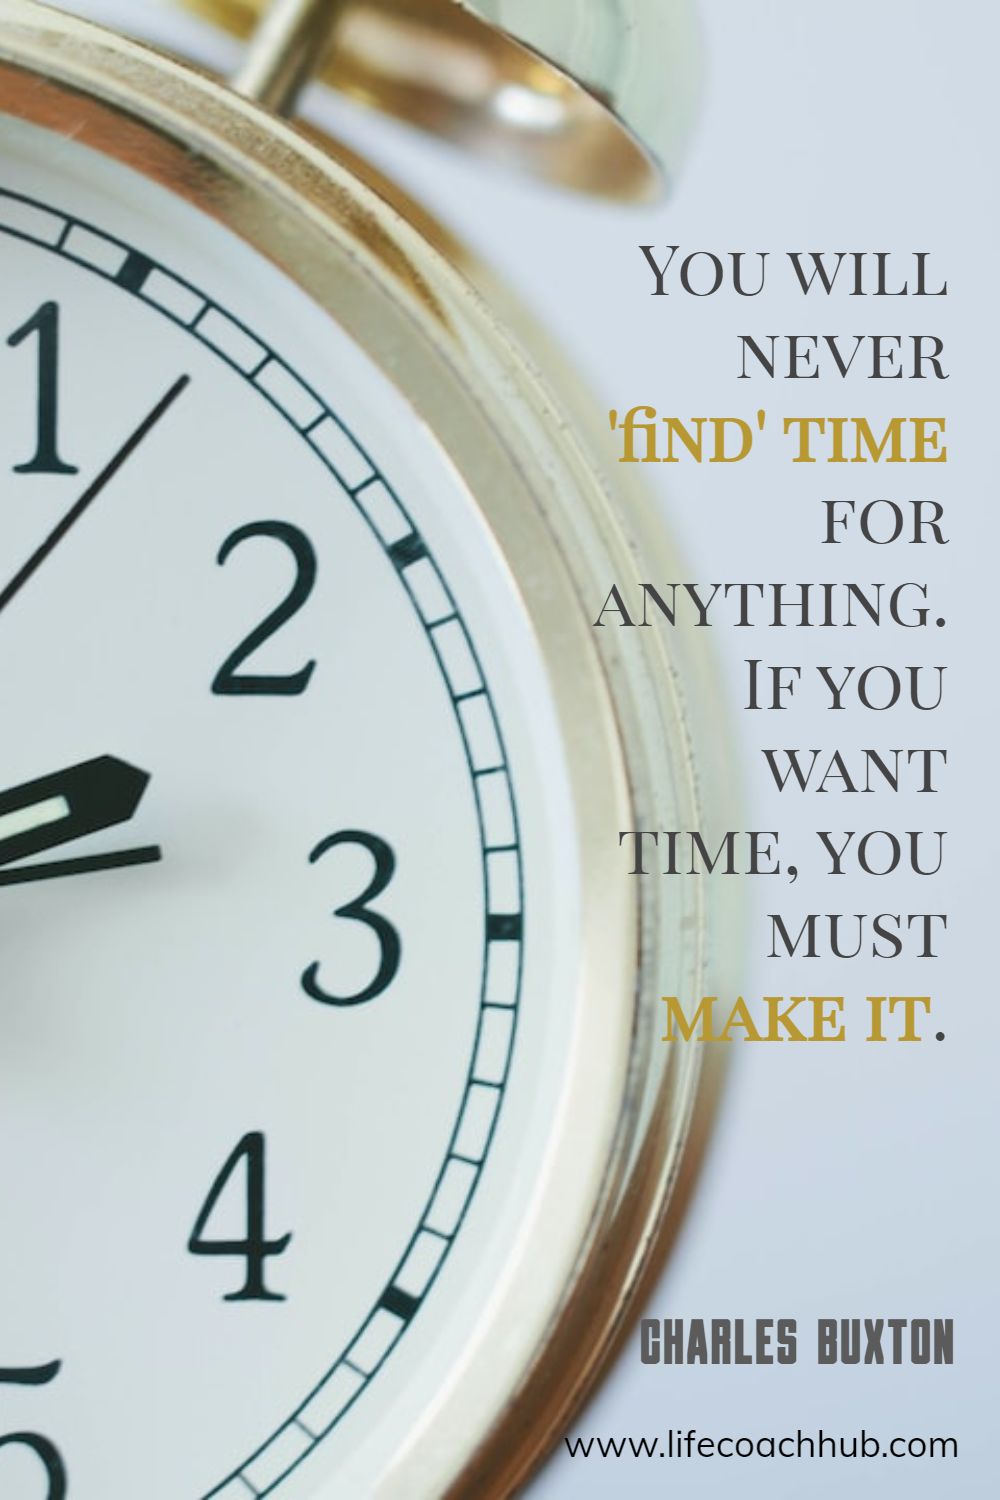 You will never 'find' time for anything. If you want time, you must make it. Charles Buxton Coaching Quote